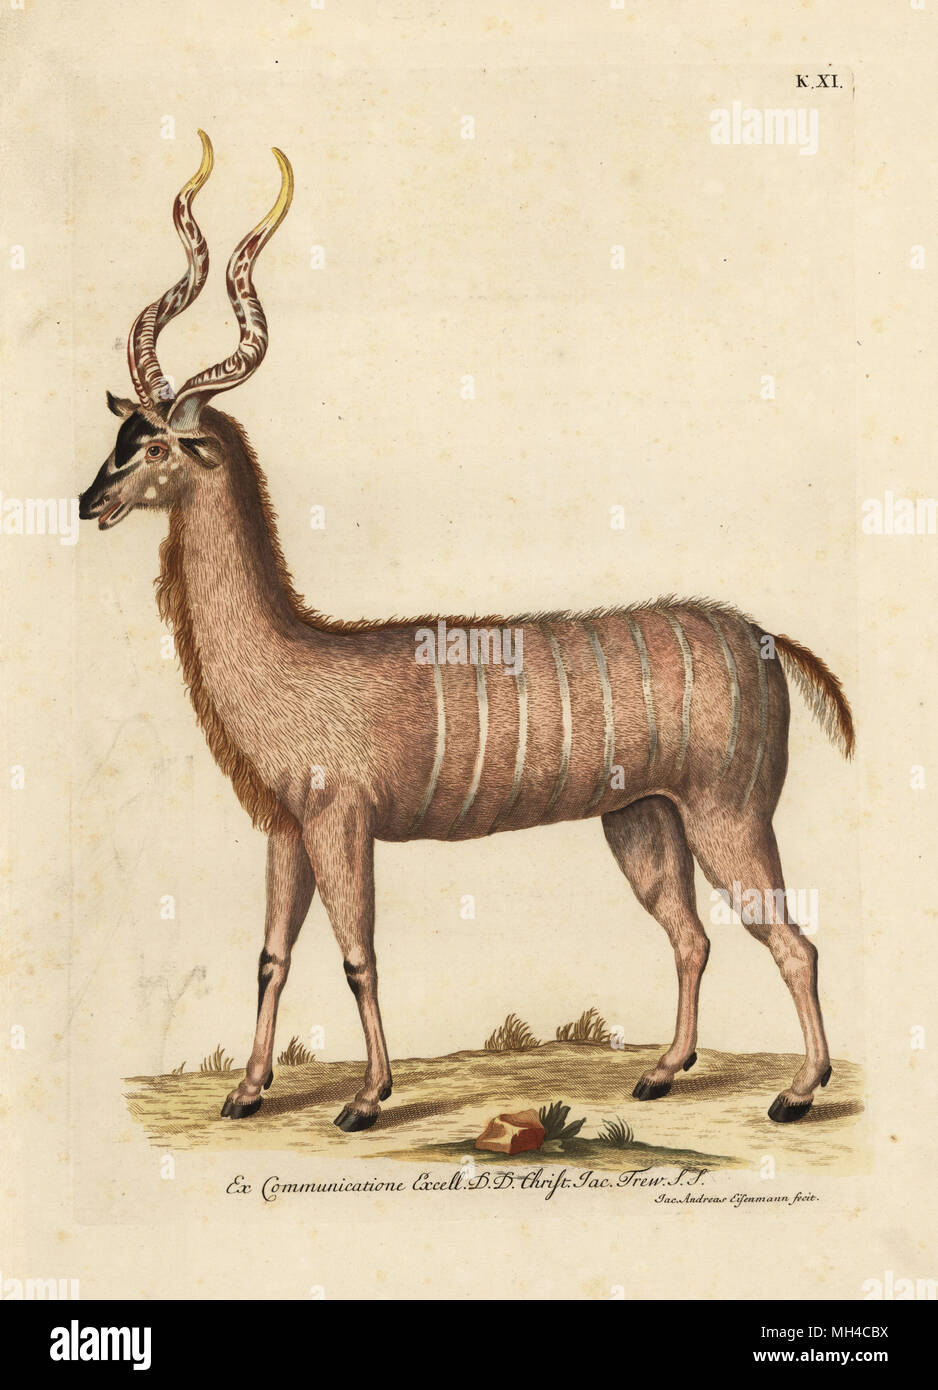 Greater kudu, Tragelaphus strepsiceros (Un coutou d'Afrique). Handcoloured copperplate engraving by Jakob-Andreas Eisemann from Georg Wolfgang Knorr's Deliciae Naturae Selectae of Kabinet van Zeldzaamheden der Natuur, Blusse and Son, Nuremberg, 1771. Specimens from a Wunderkammer or Cabinet of Curiosities owned by Dr. Christoph Jacob Trew in Nuremberg. Stock Photo